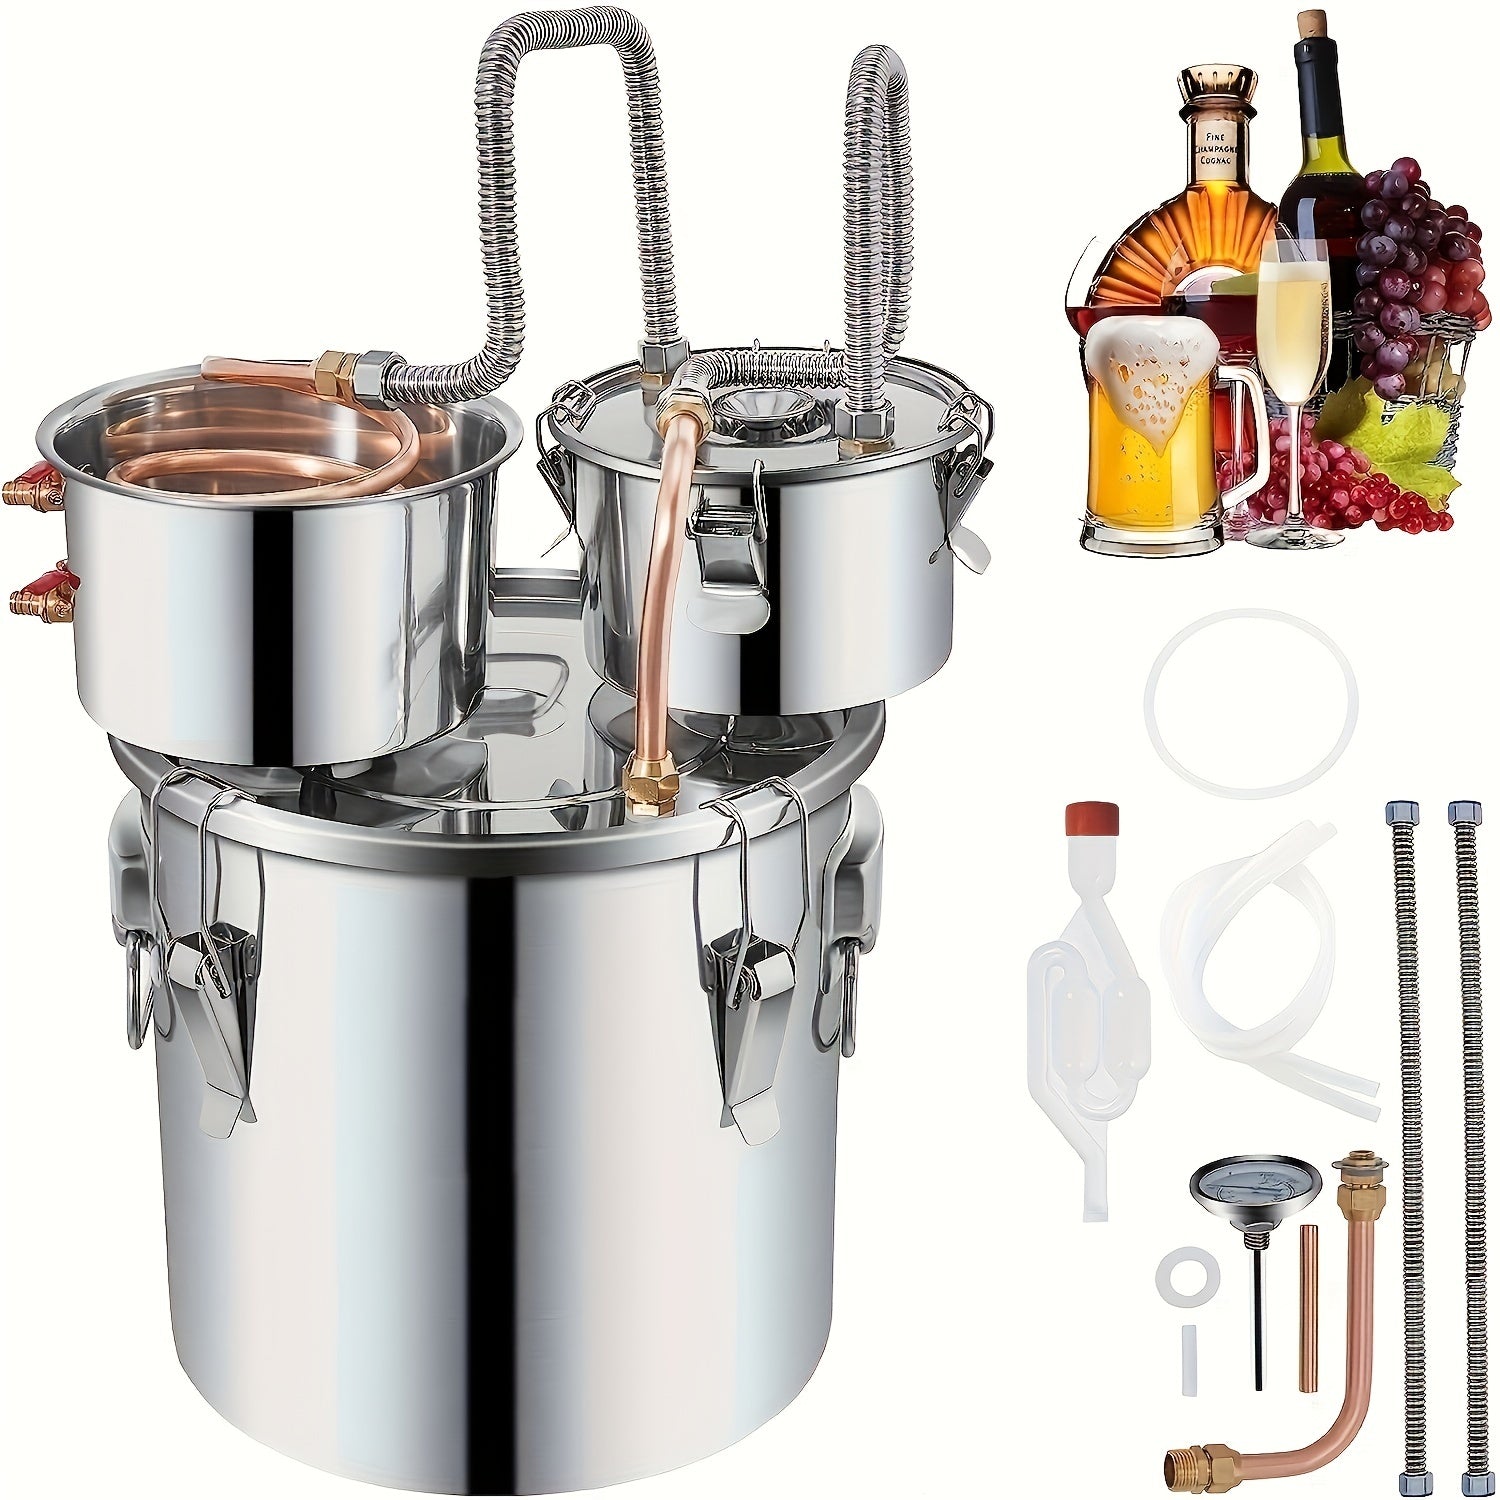 Set, Alcohol Still, 3 Gallon, Stainless Steel Alcohol Distiller With Copper Tube & Build-in Thermometer & Water Pump, Double Thumper Keg Home Brewing Kit, For DIY Whiskey Wine Brandy